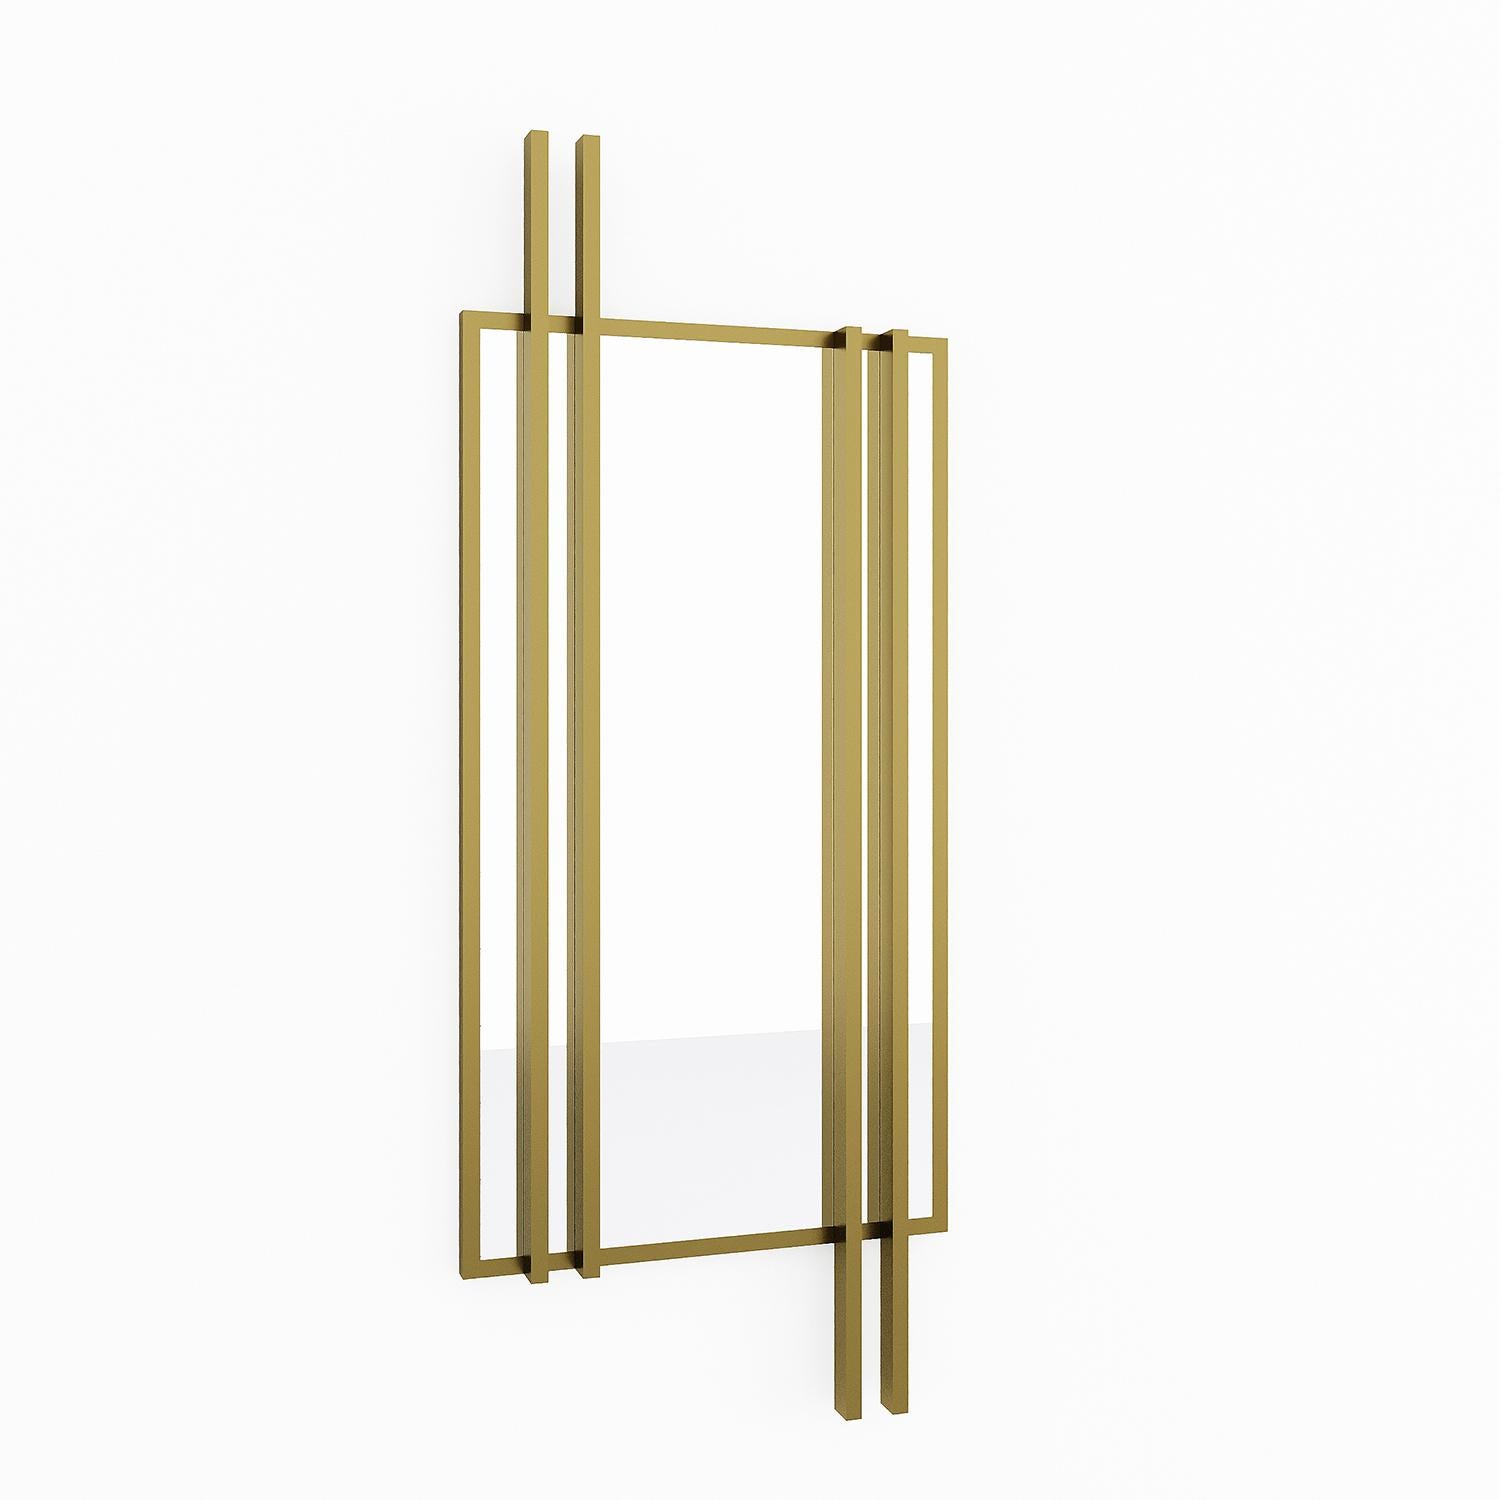 The item in stock is available finished in matte lacquered frame in brass color and natural mirror.

A beautiful piece of furniture for any environment, Cruzado is a mirror with an elegant and balanced design, made with a lacquered wood frame in